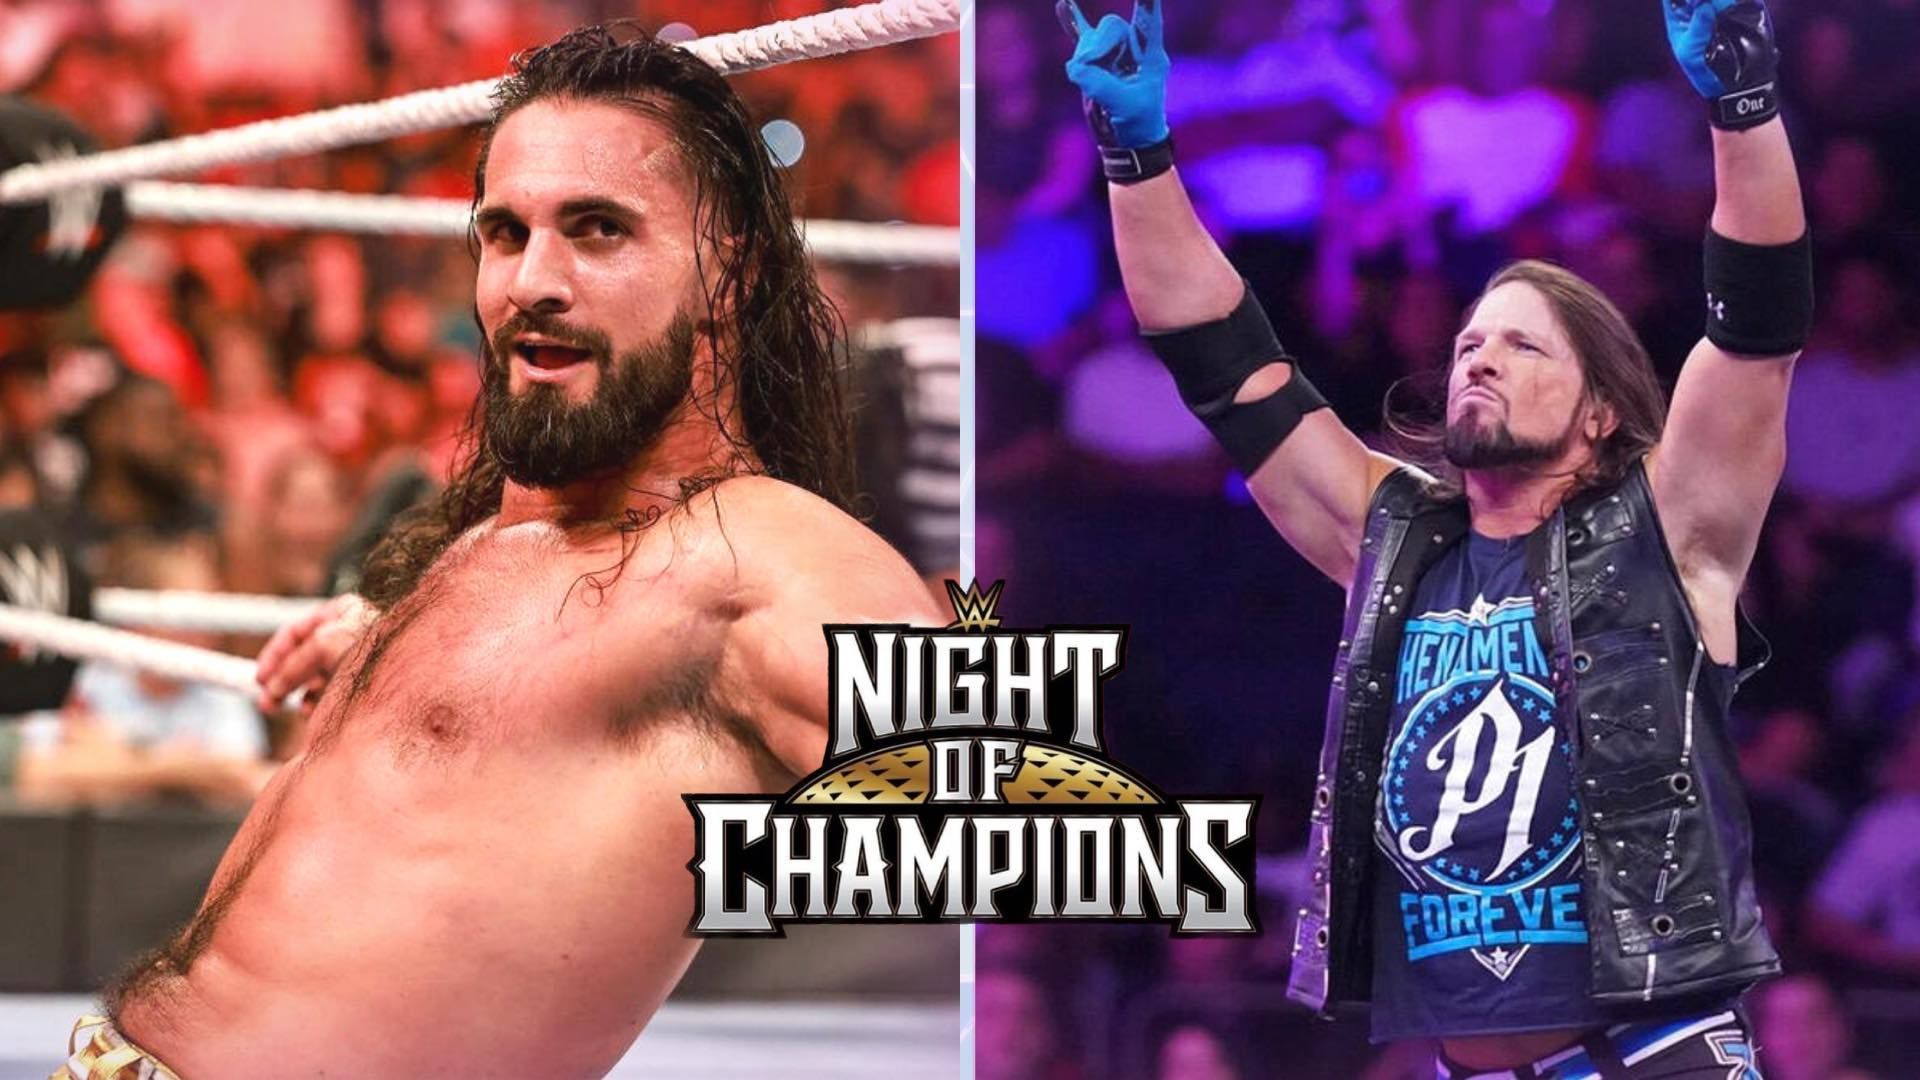 Night of Champions will crown a new Champion in WWE.